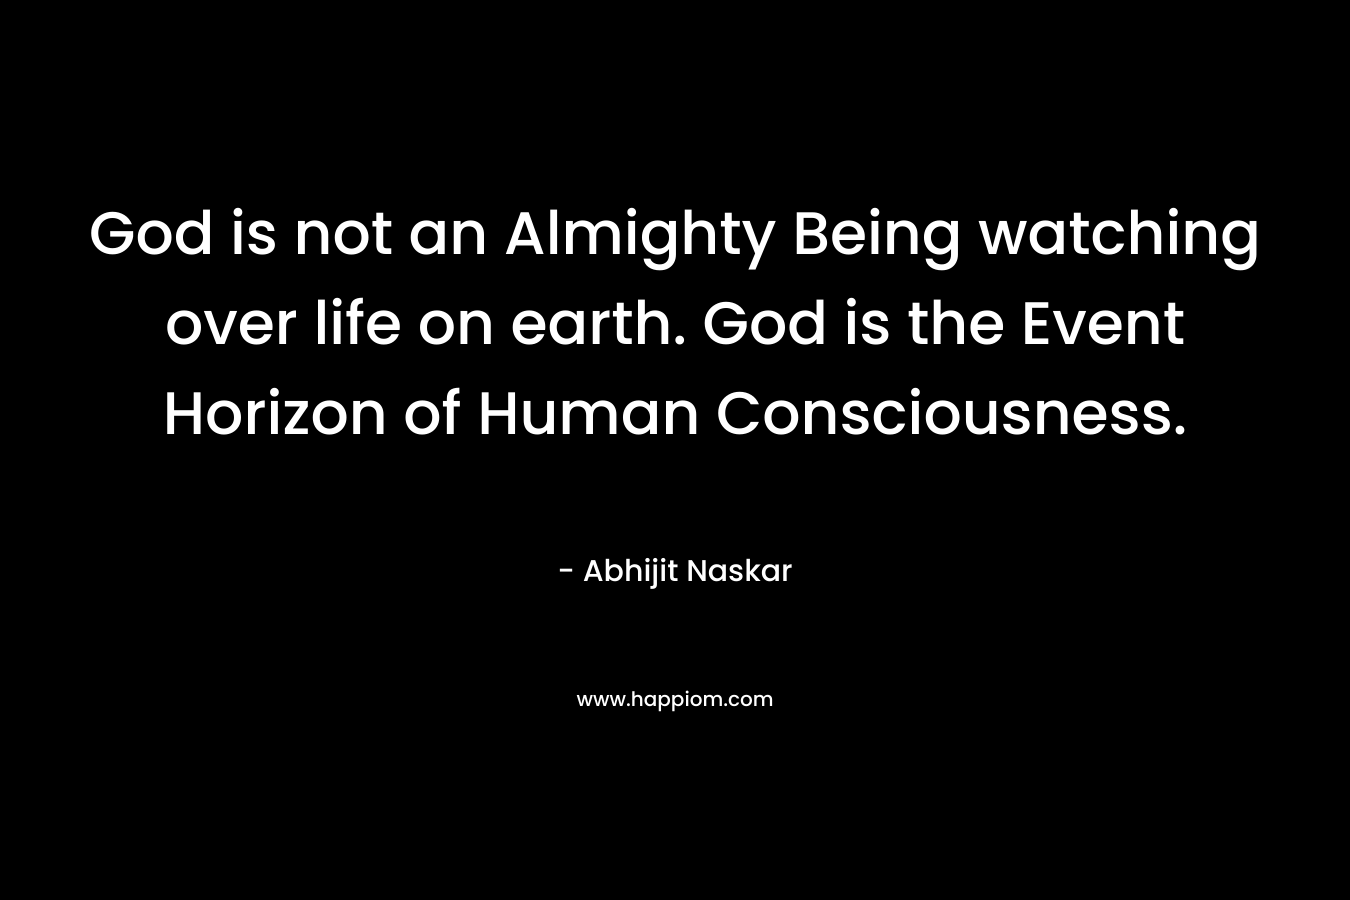 God is not an Almighty Being watching over life on earth. God is the Event Horizon of Human Consciousness.